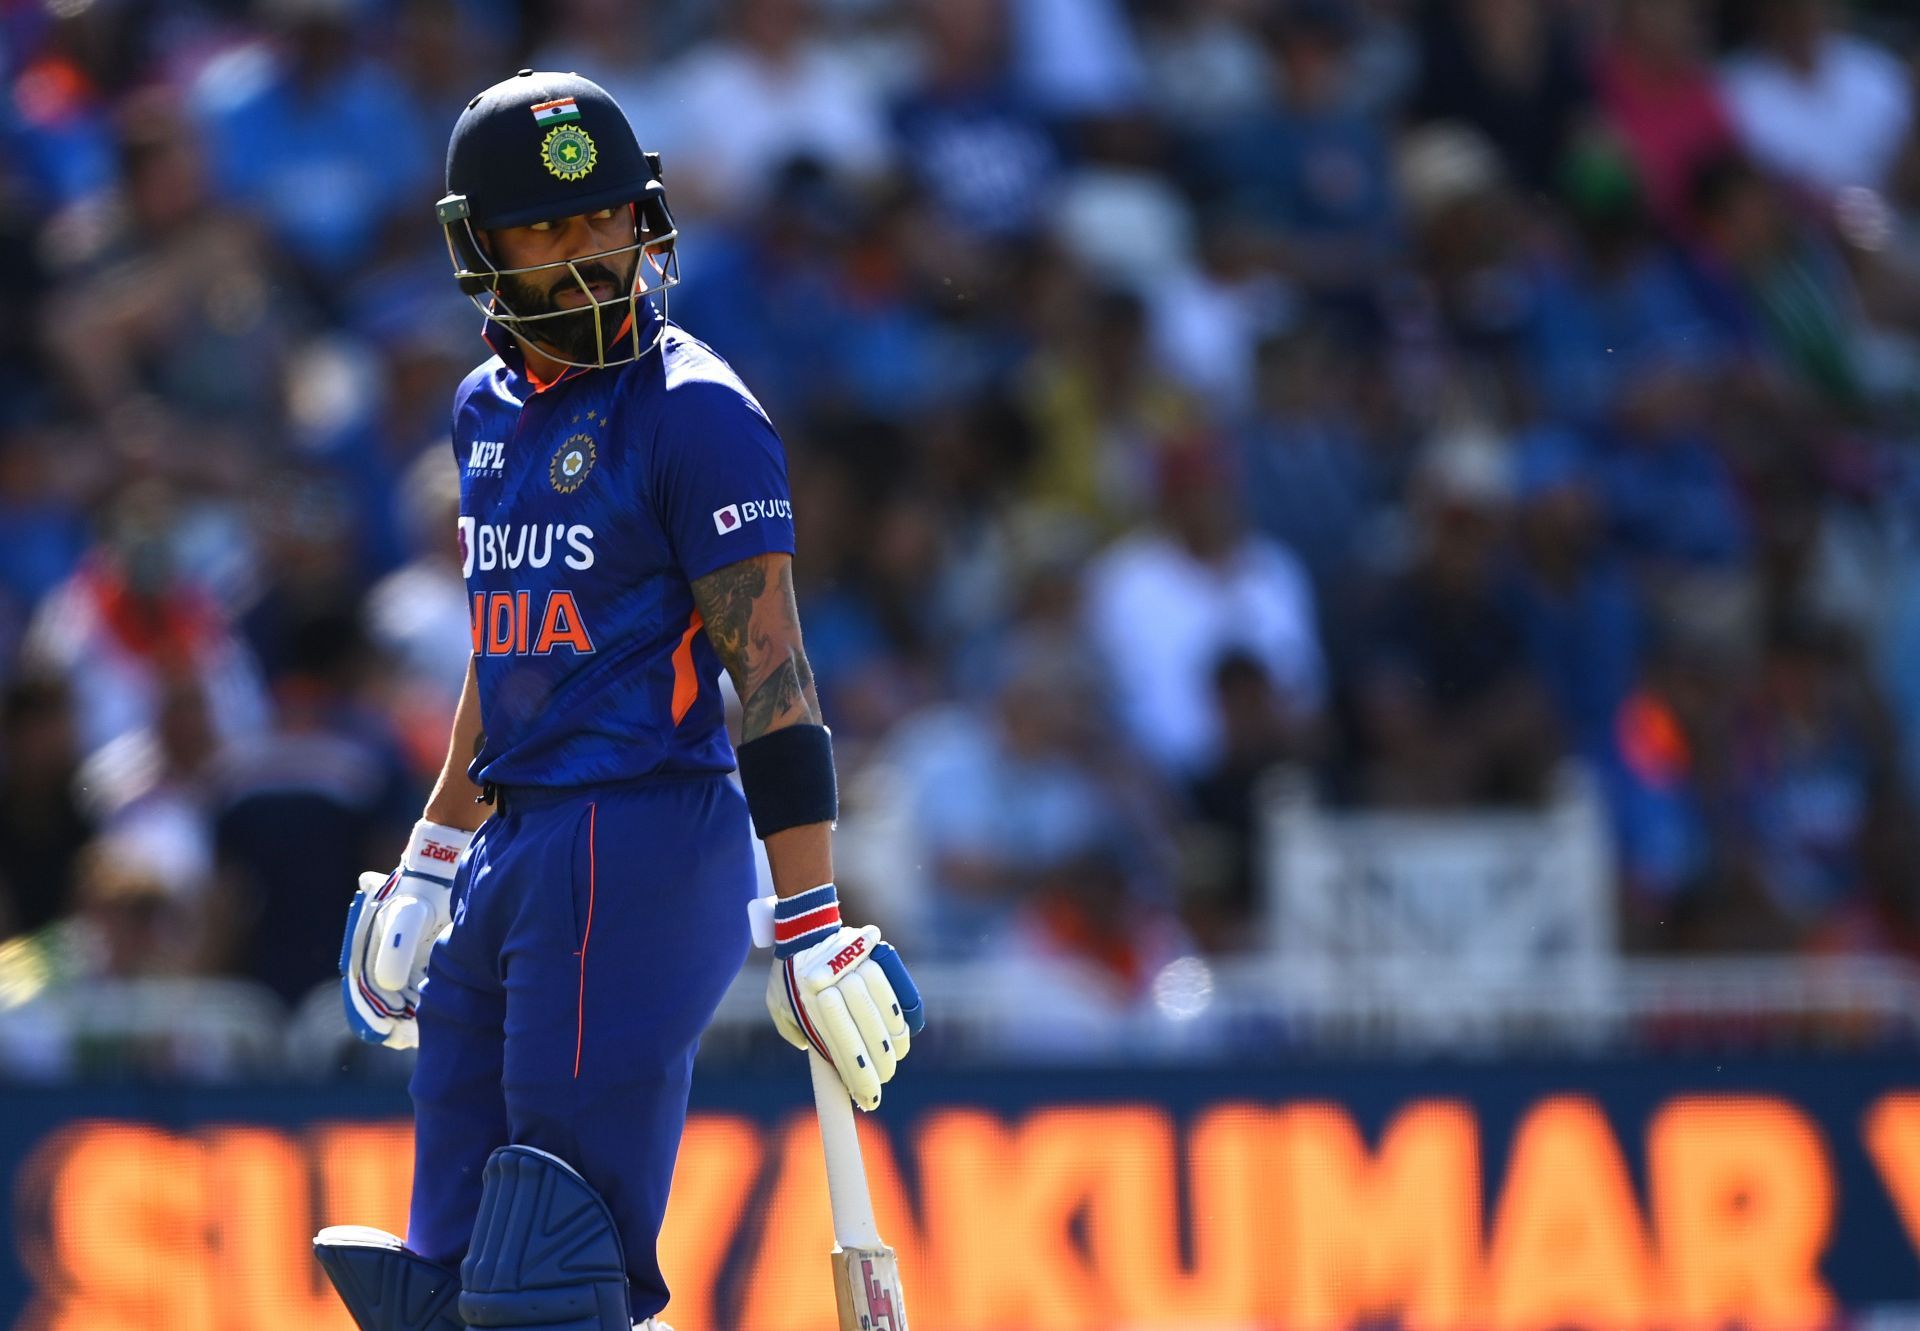 Virat Kohli failed to play a substantial knock in the T20I series against England